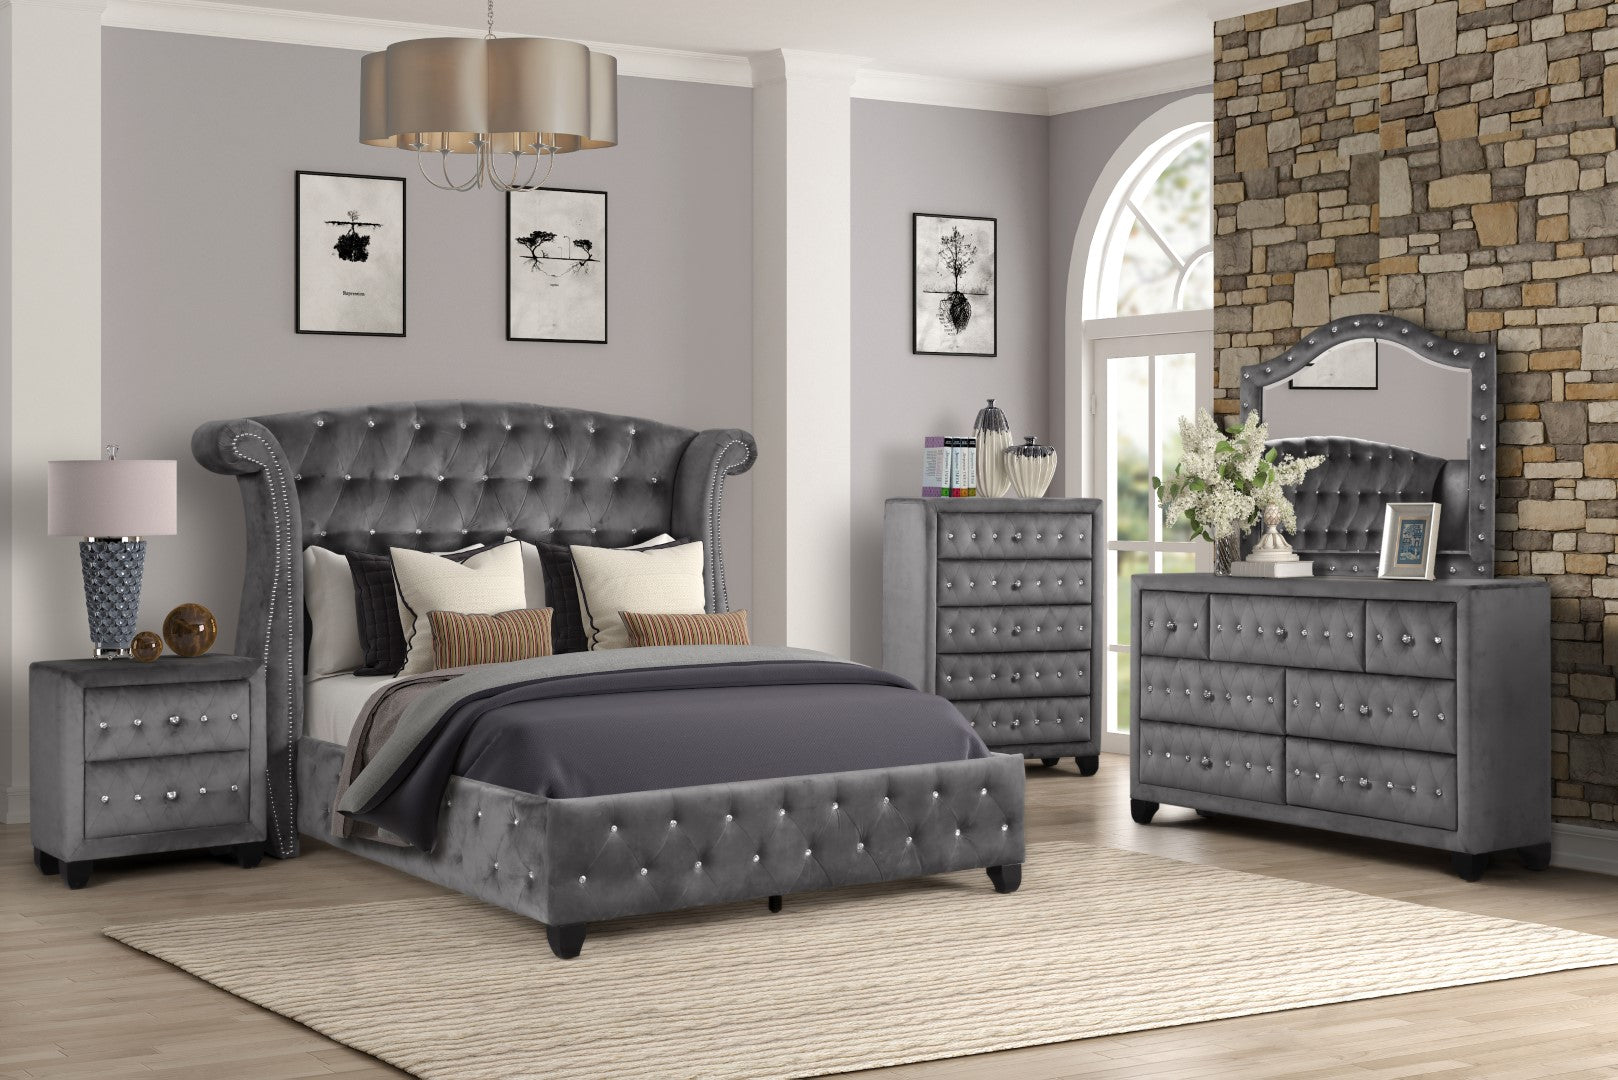 Galaxy Home Sophia Queen 5 Upholstery Bedroom Set Made With Wood Gray Wood